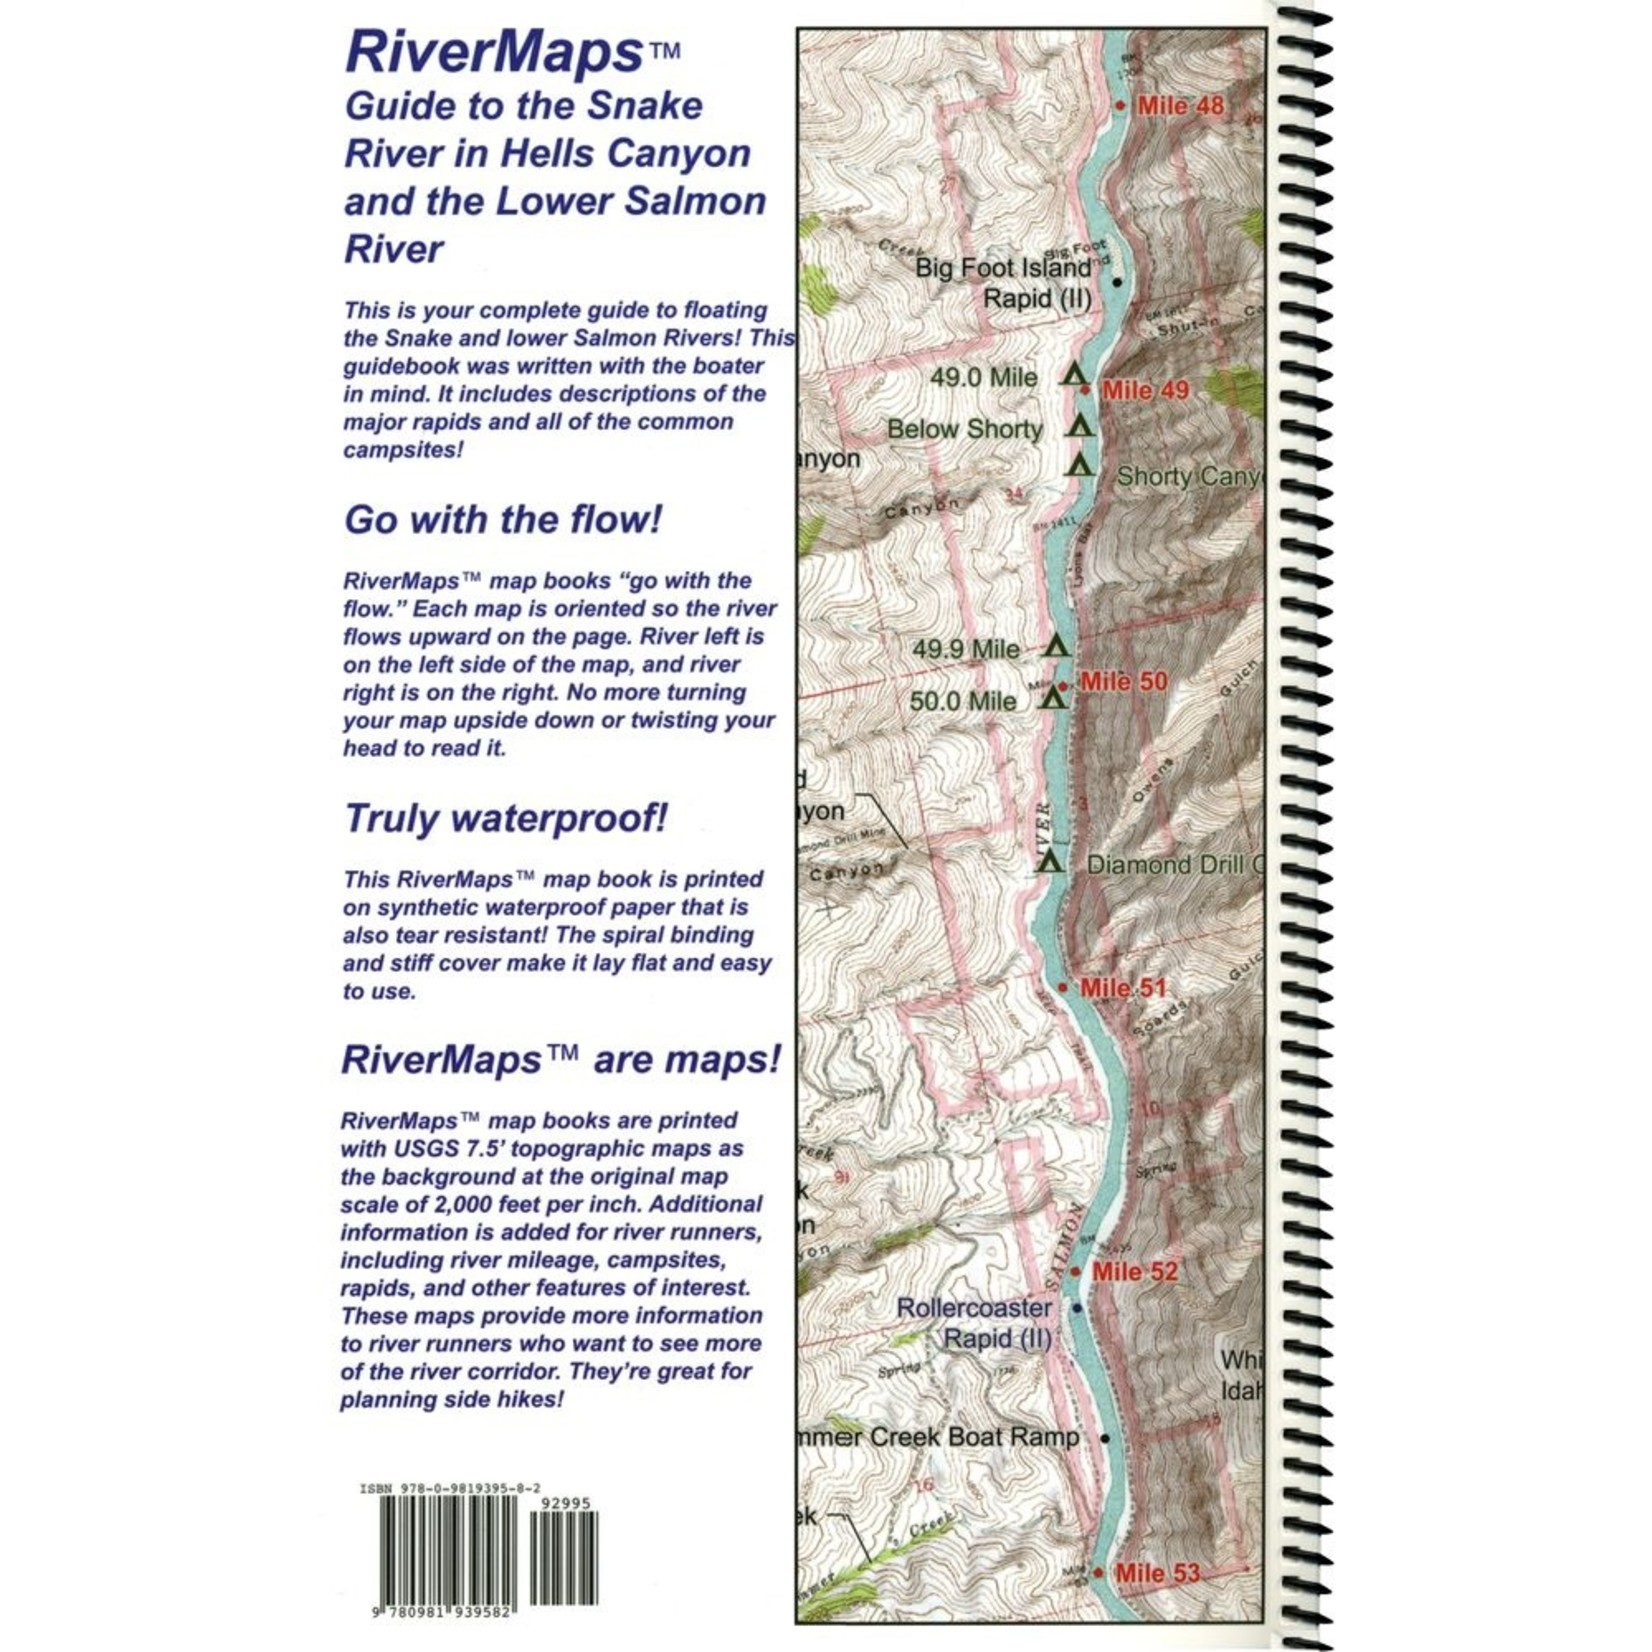 Rivermaps RiverMaps Guide to the Snake River in Hells Canyon and the Lower Salmon River